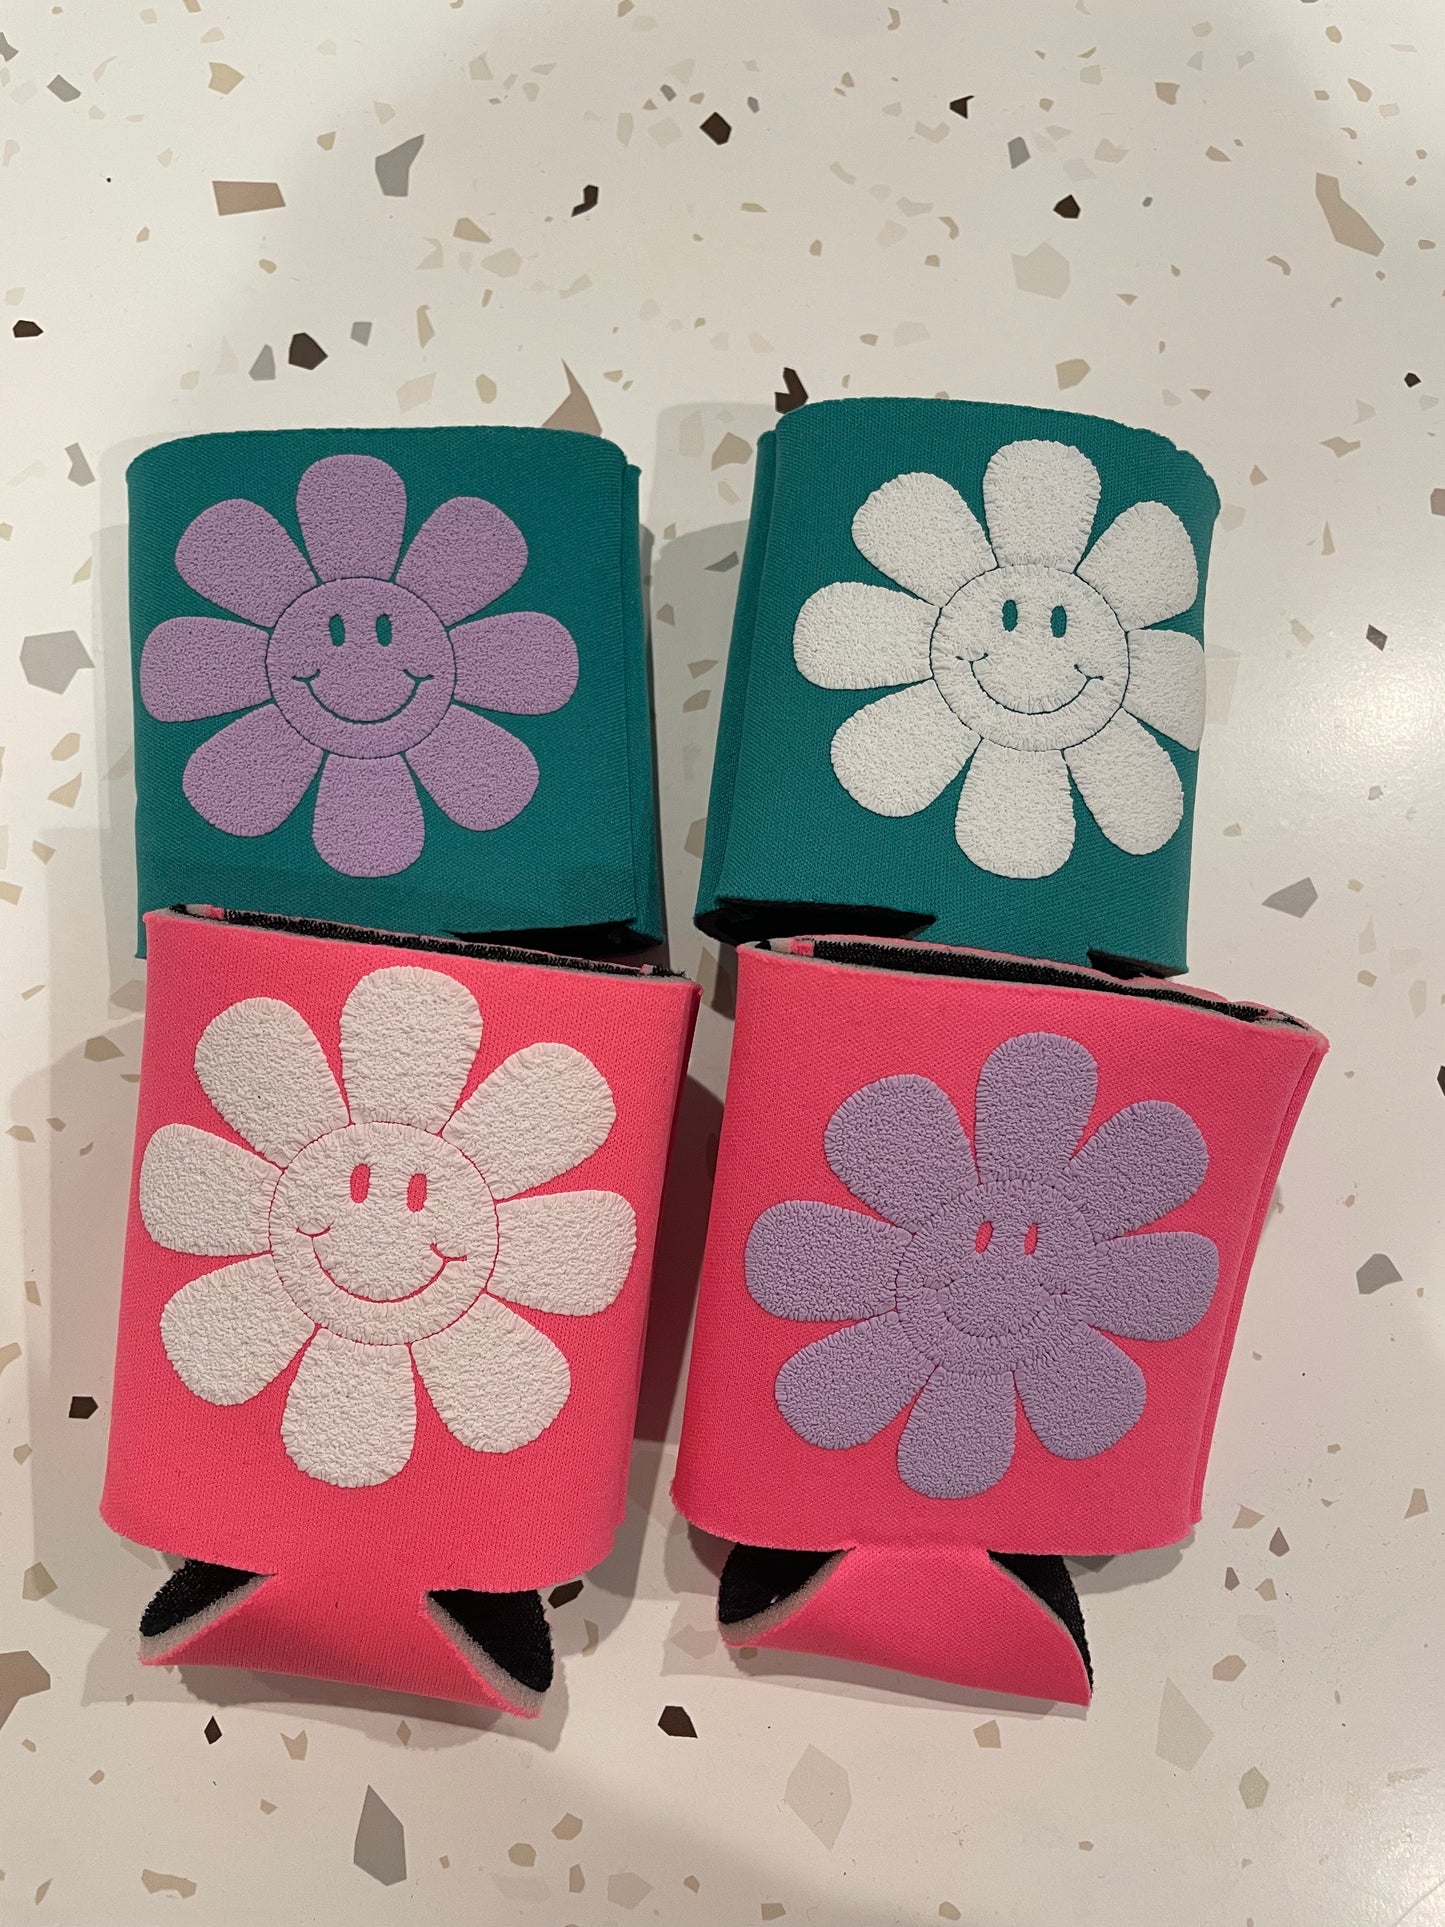 12 oz Can Koozie - Puff Flower Smile - Insulated Beverage Holder